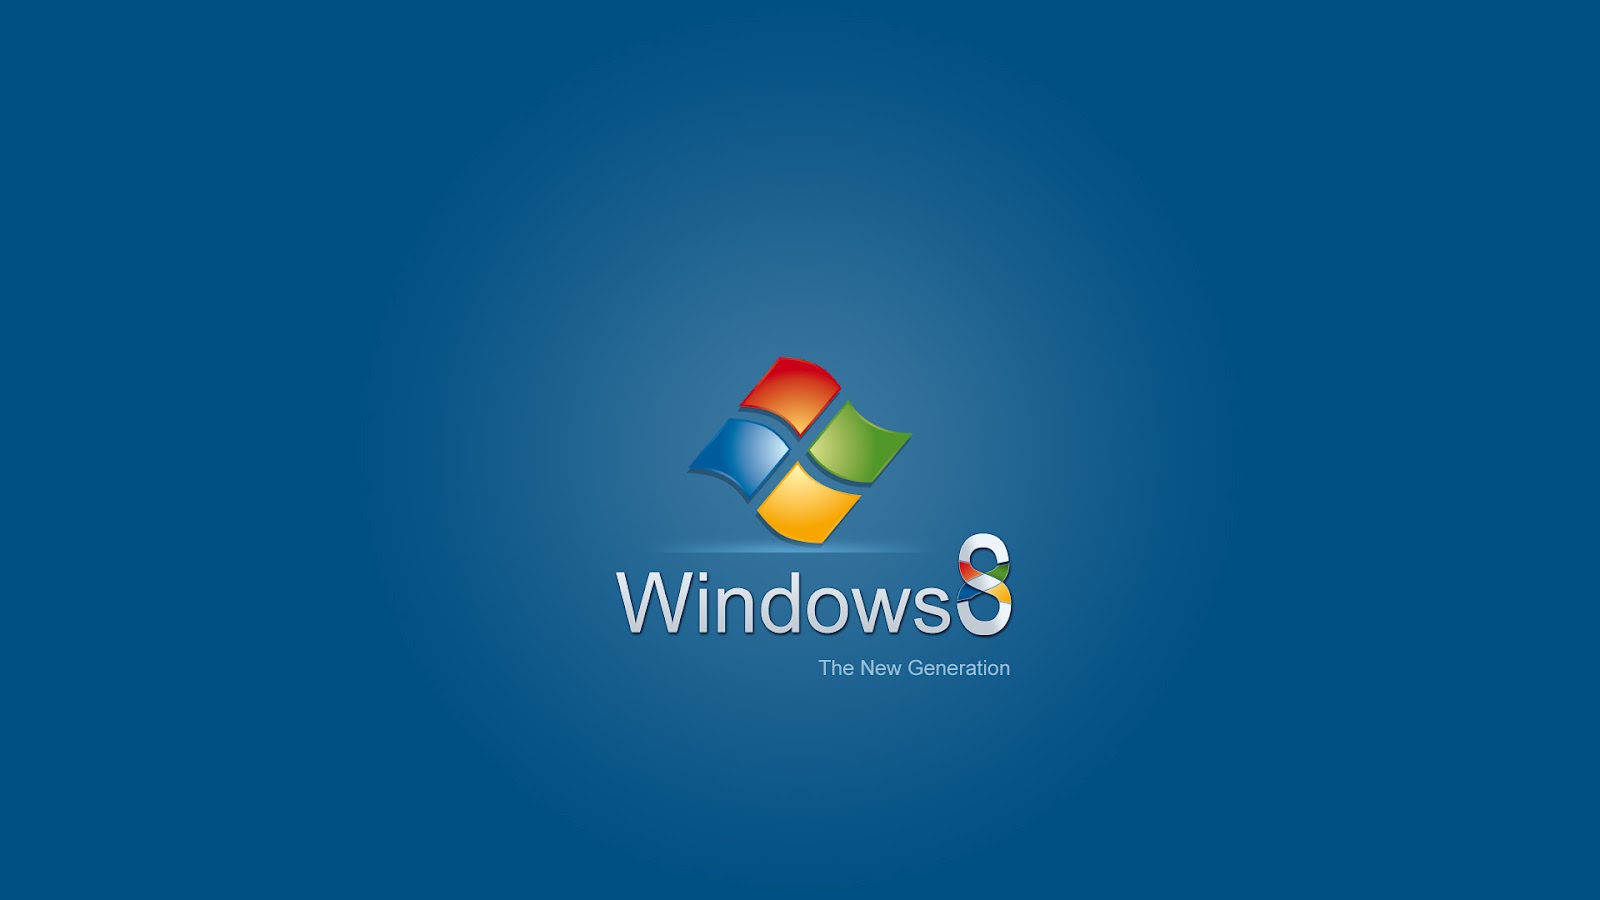 Top Windows 8 Wallpapers ~ My Technology Updates